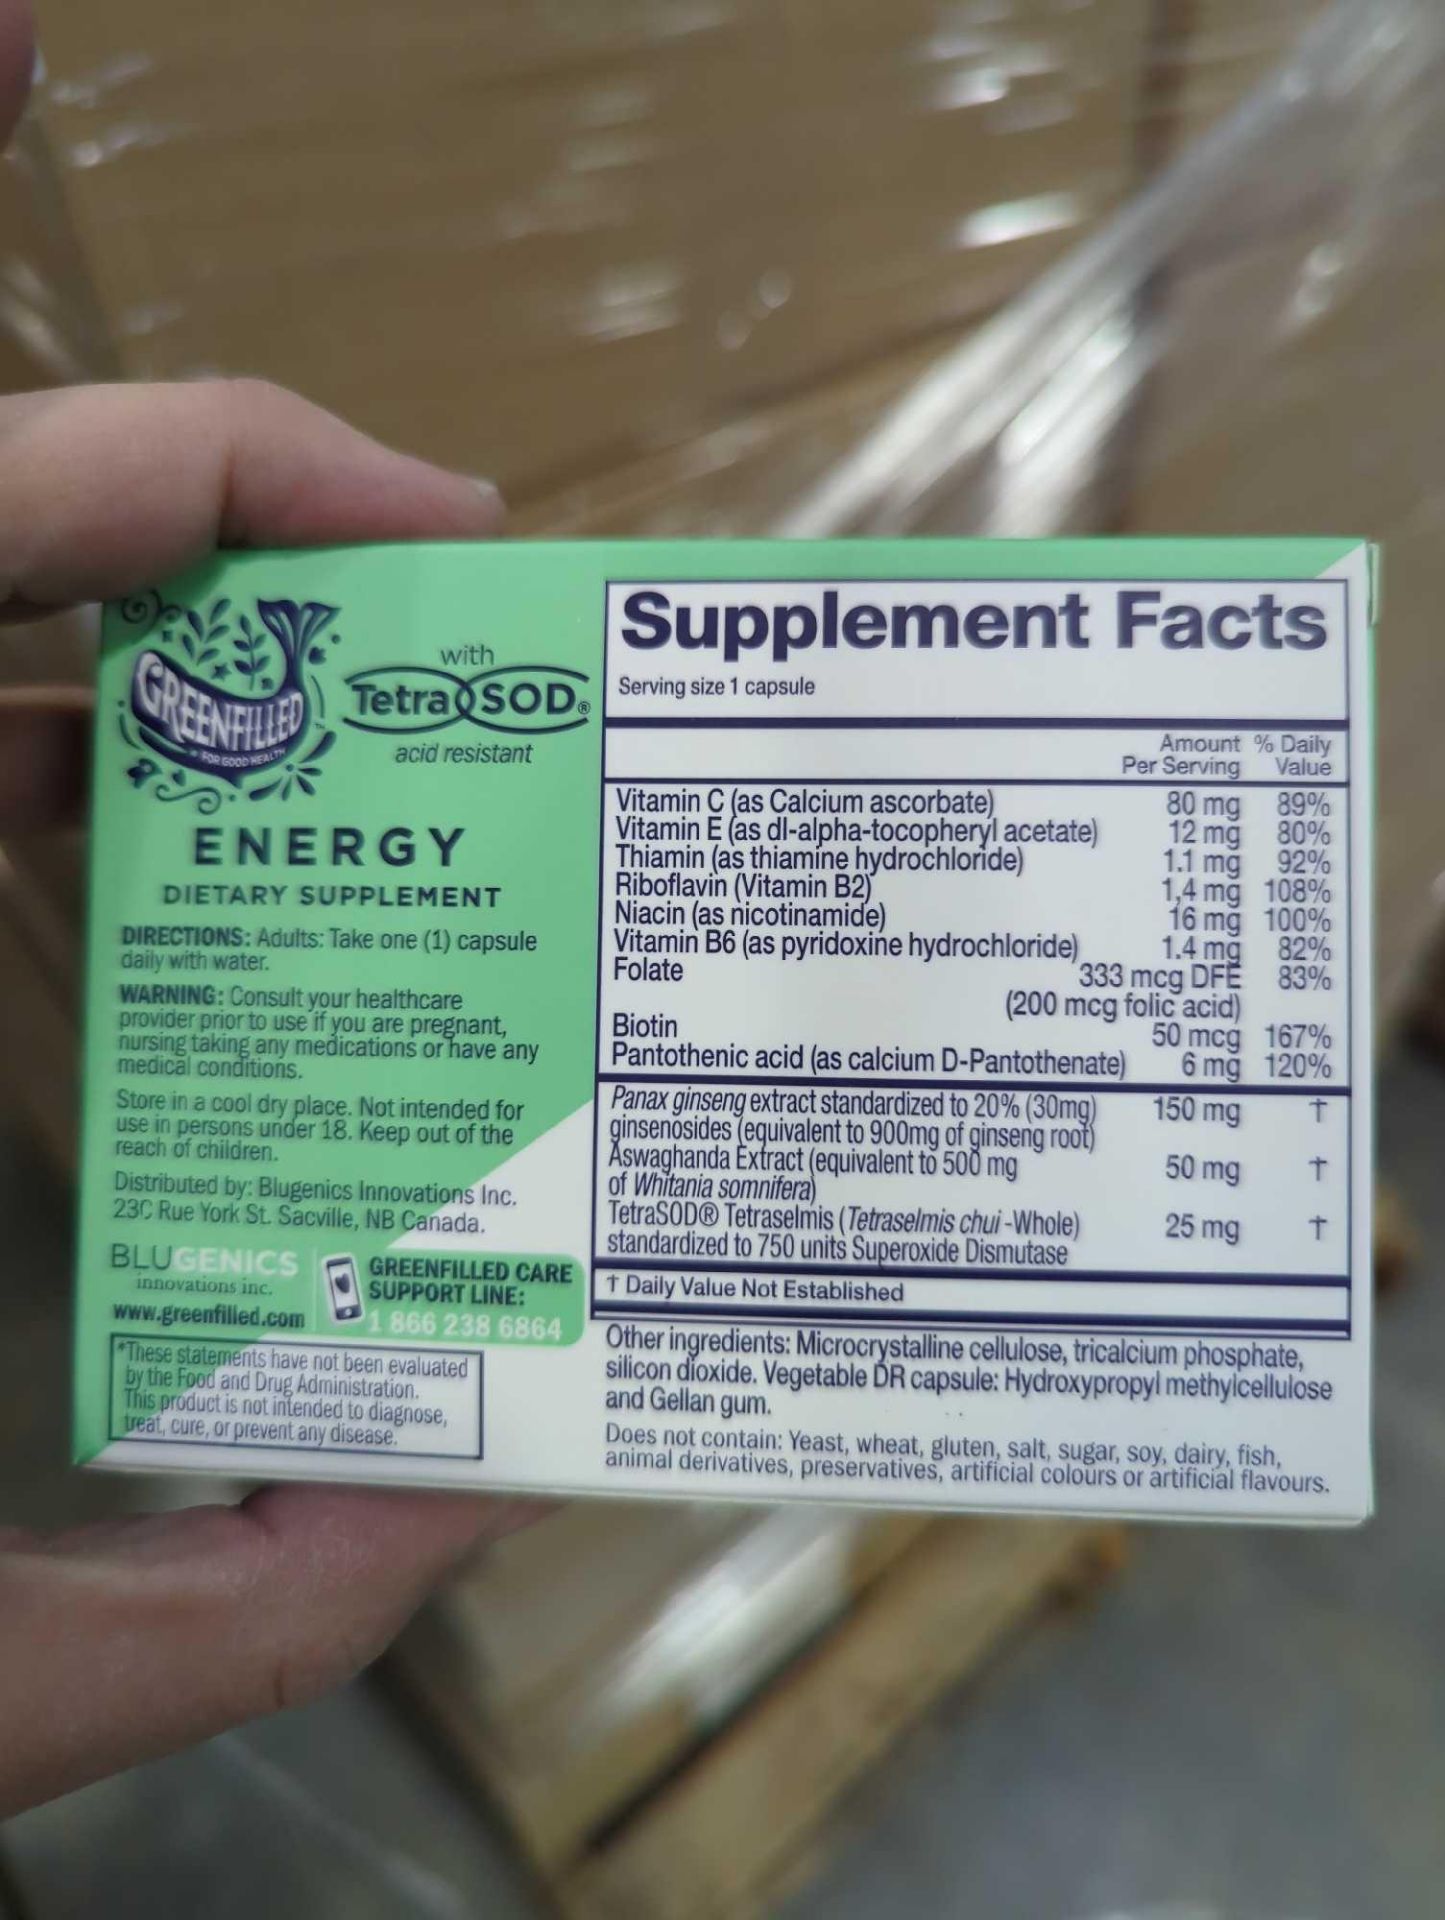 pallet of Greenfield energy controlled release supplements - Image 3 of 5